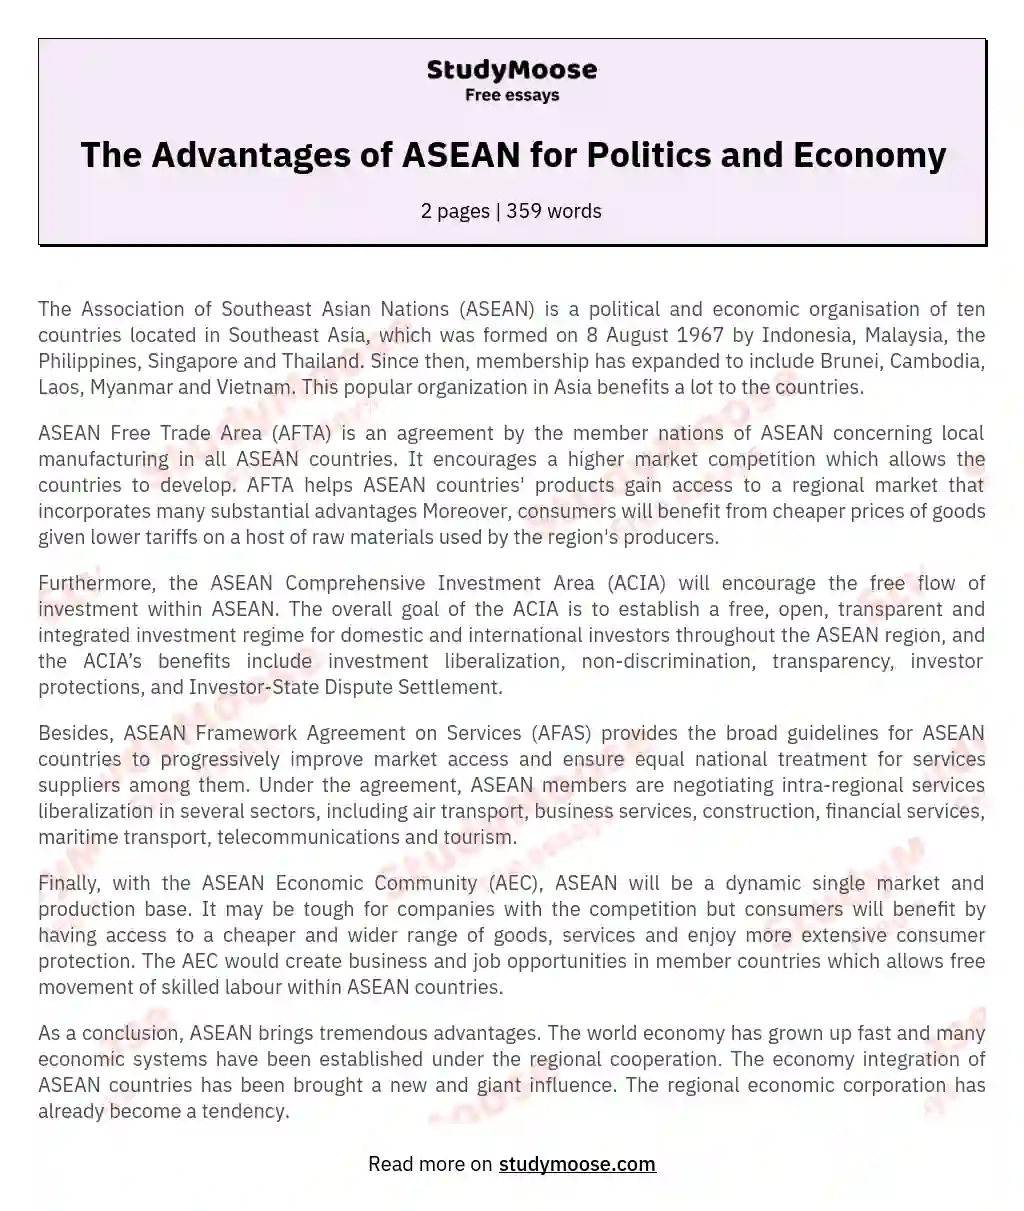 The Advantages of ASEAN for Politics and Economy essay